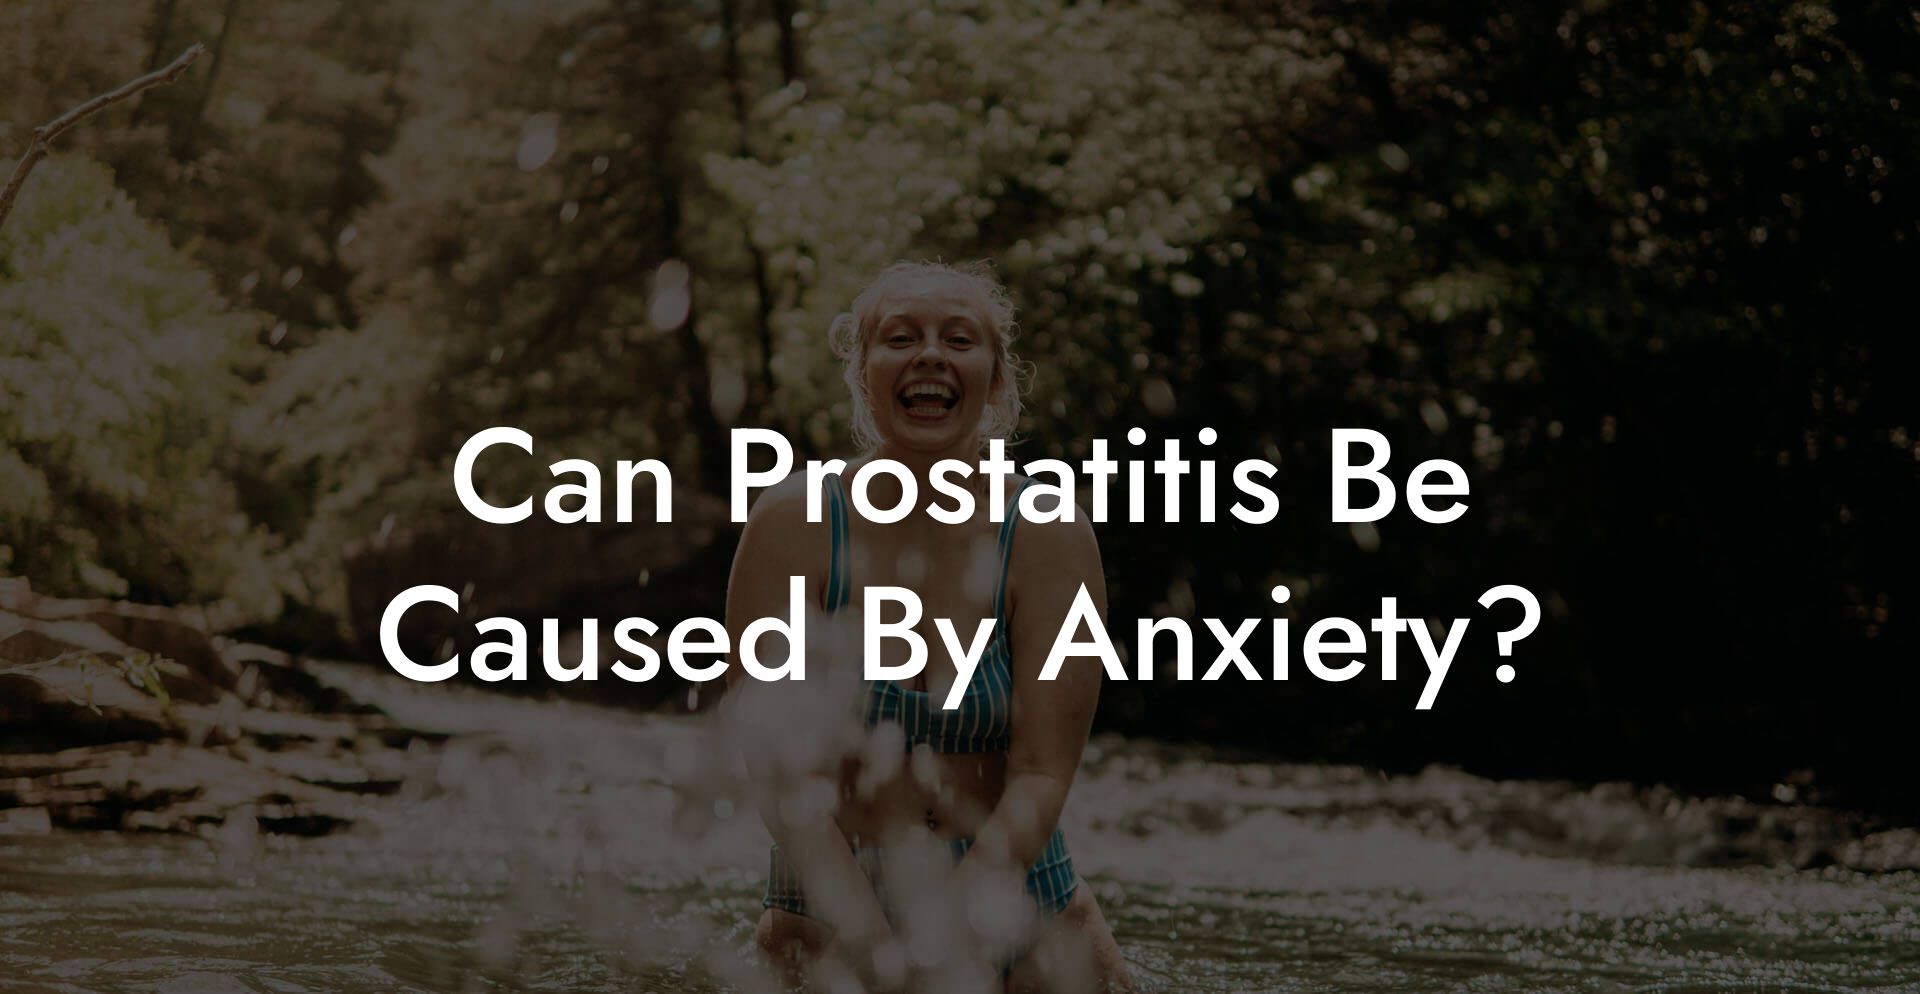 Can Prostatitis Be Caused By Anxiety?